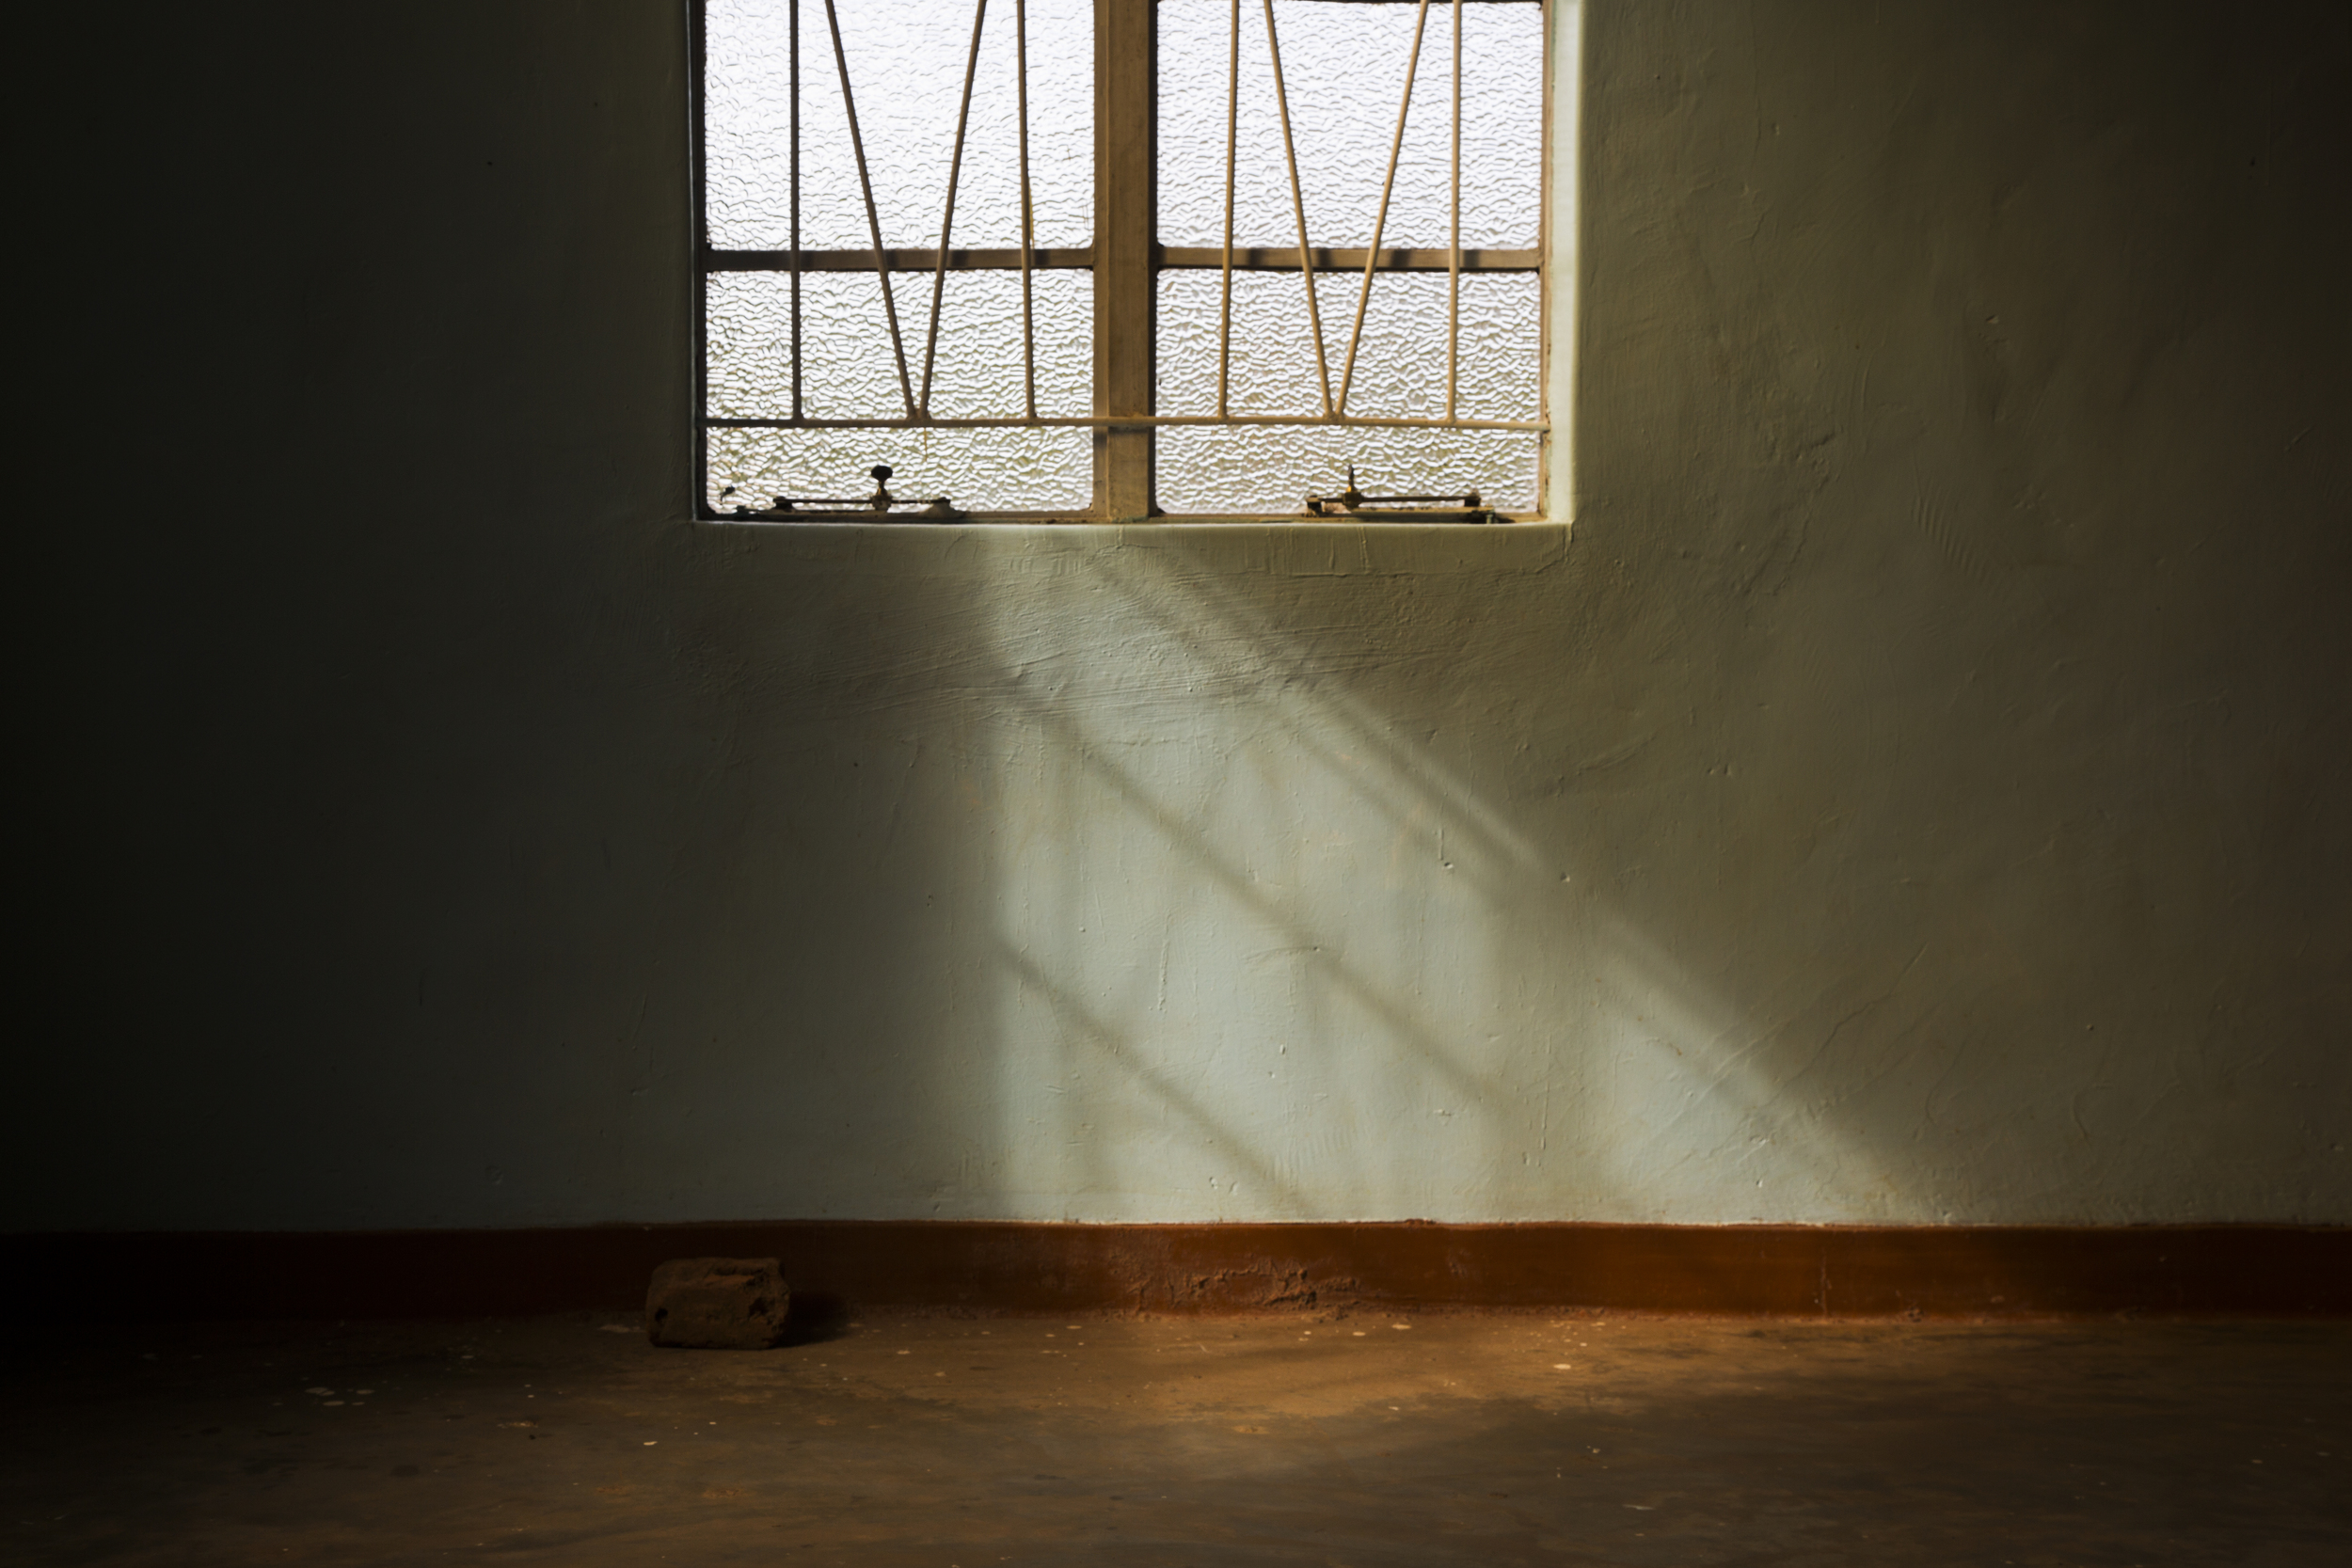  Morning light shines in through the window as members arrive at a Pentecostal church in Ntcheu District of Malawi, Africa on March 8, 2015. 